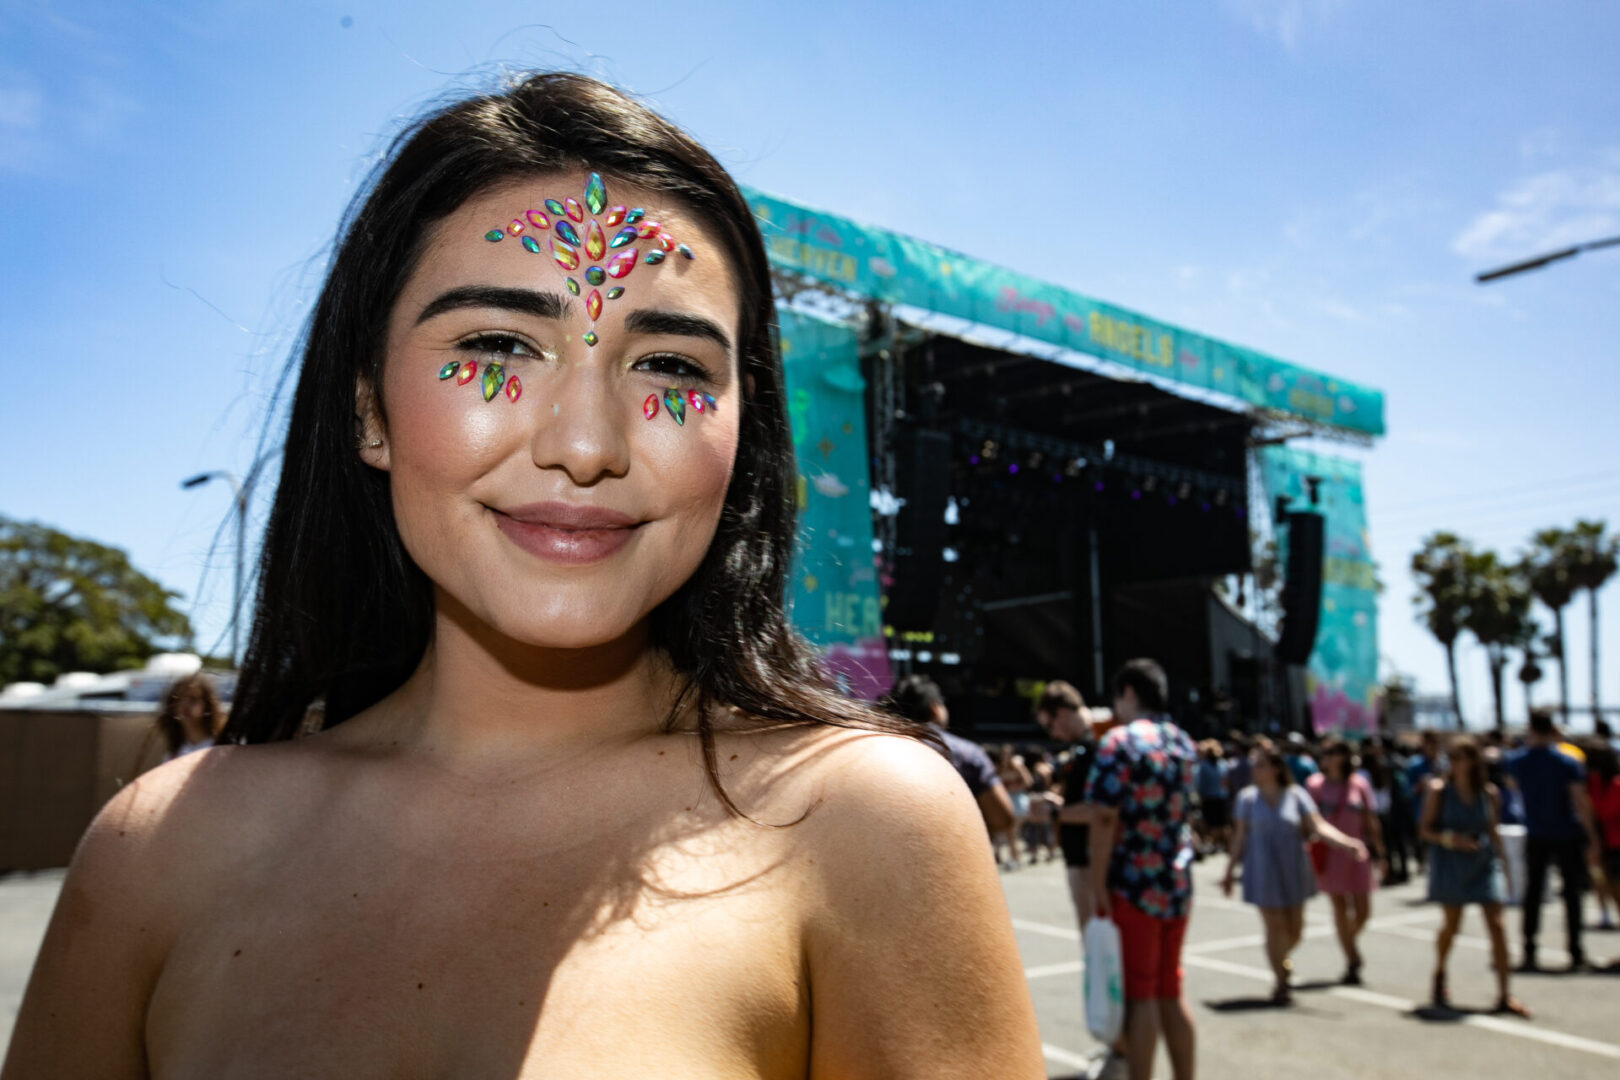 Woman with face stickers at concert